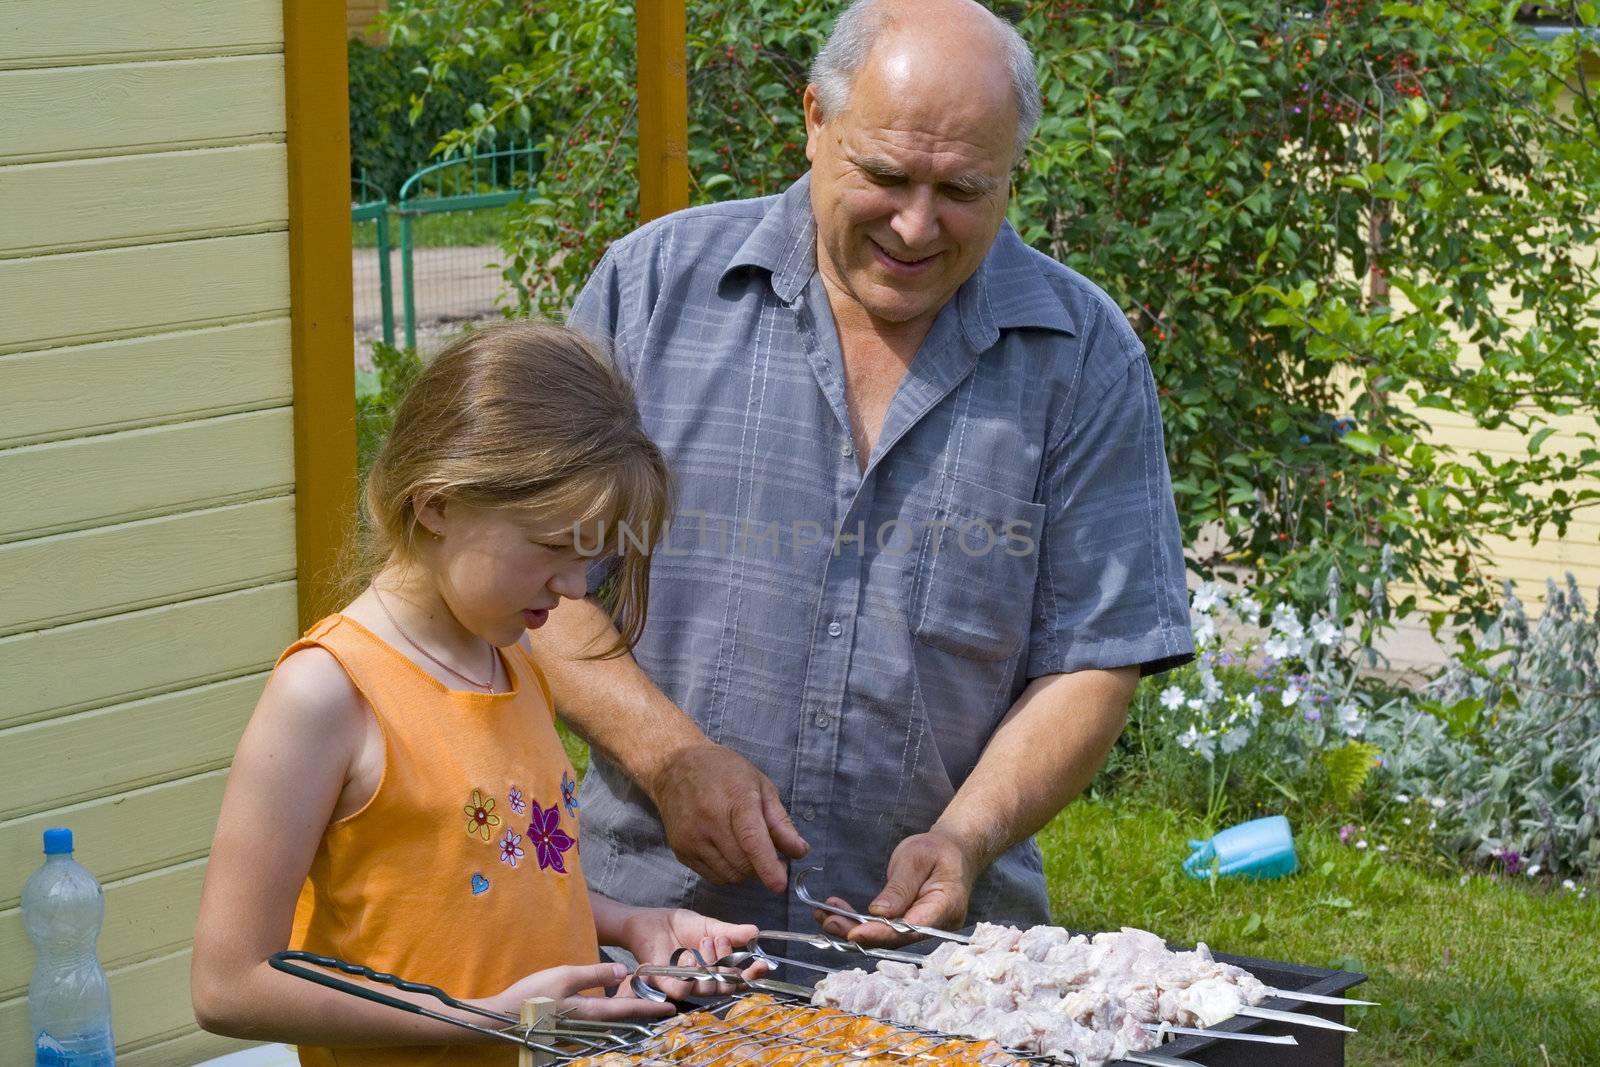 The grandfather learns the granddaughter to do a kebab